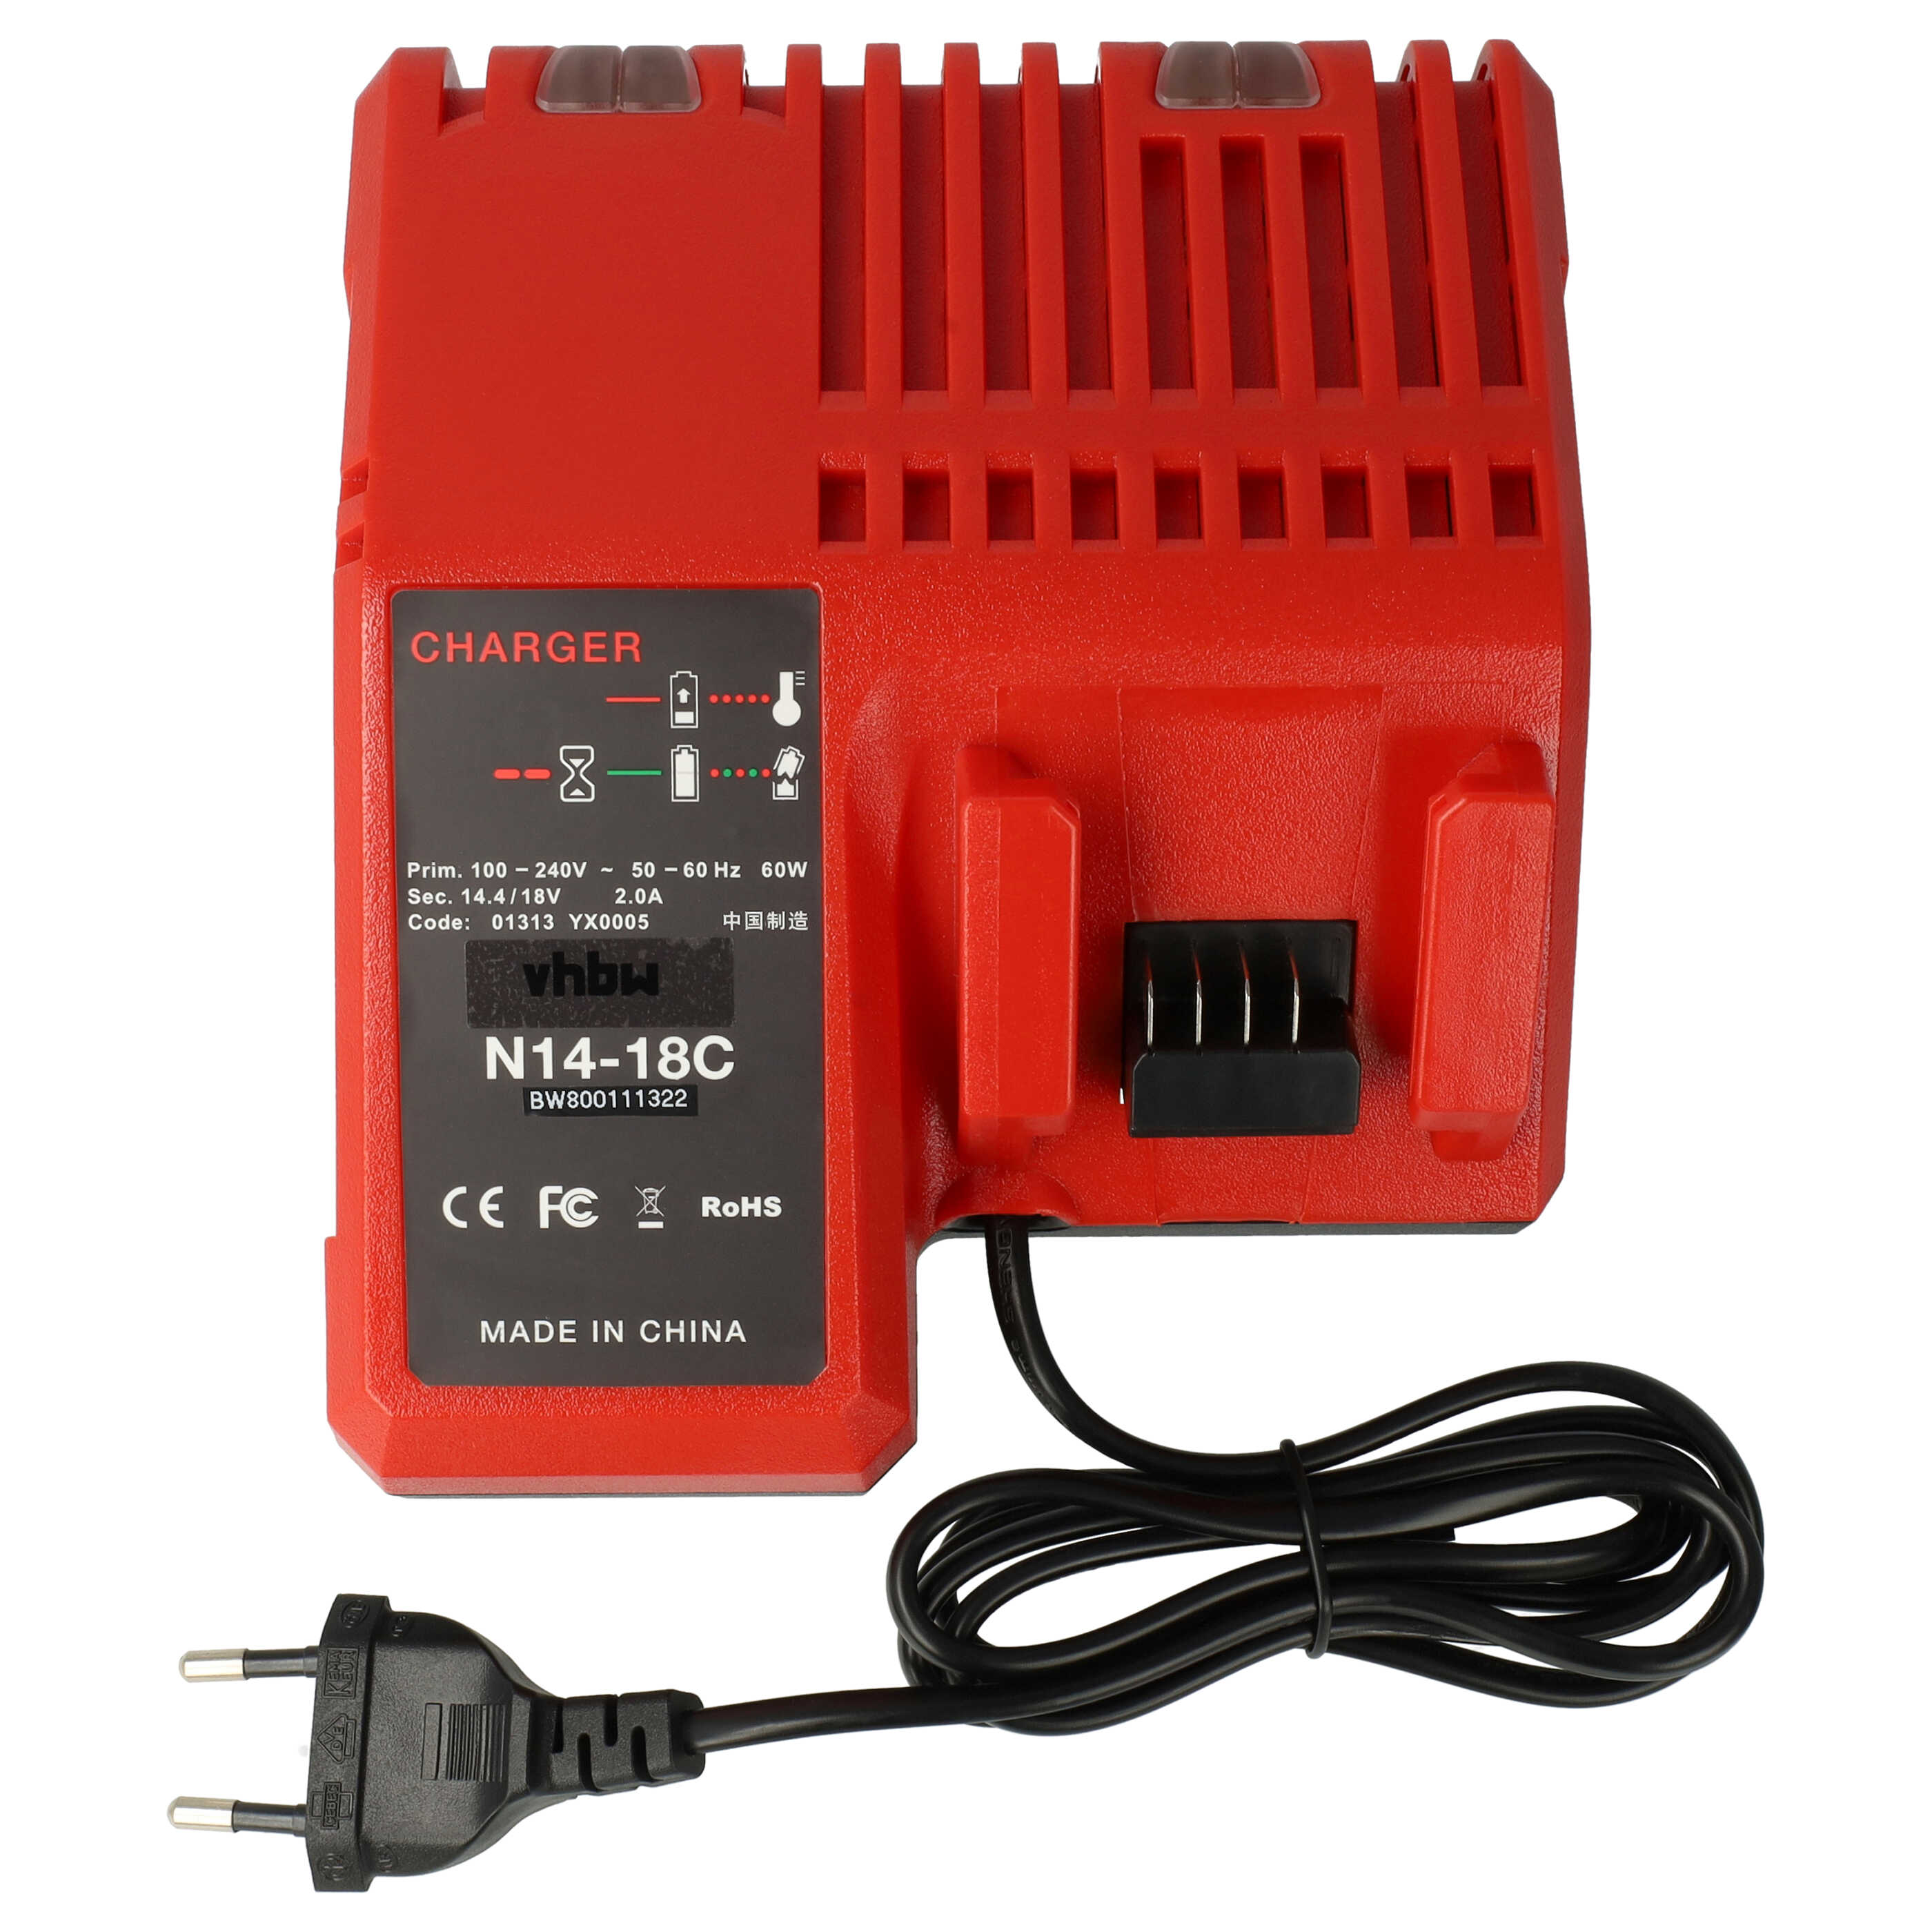 Charger replaces Milwaukee M18, 4932352959, M14 for BTIPower Tool Batteries etc. Li-Ion 14.4 V / 18 V